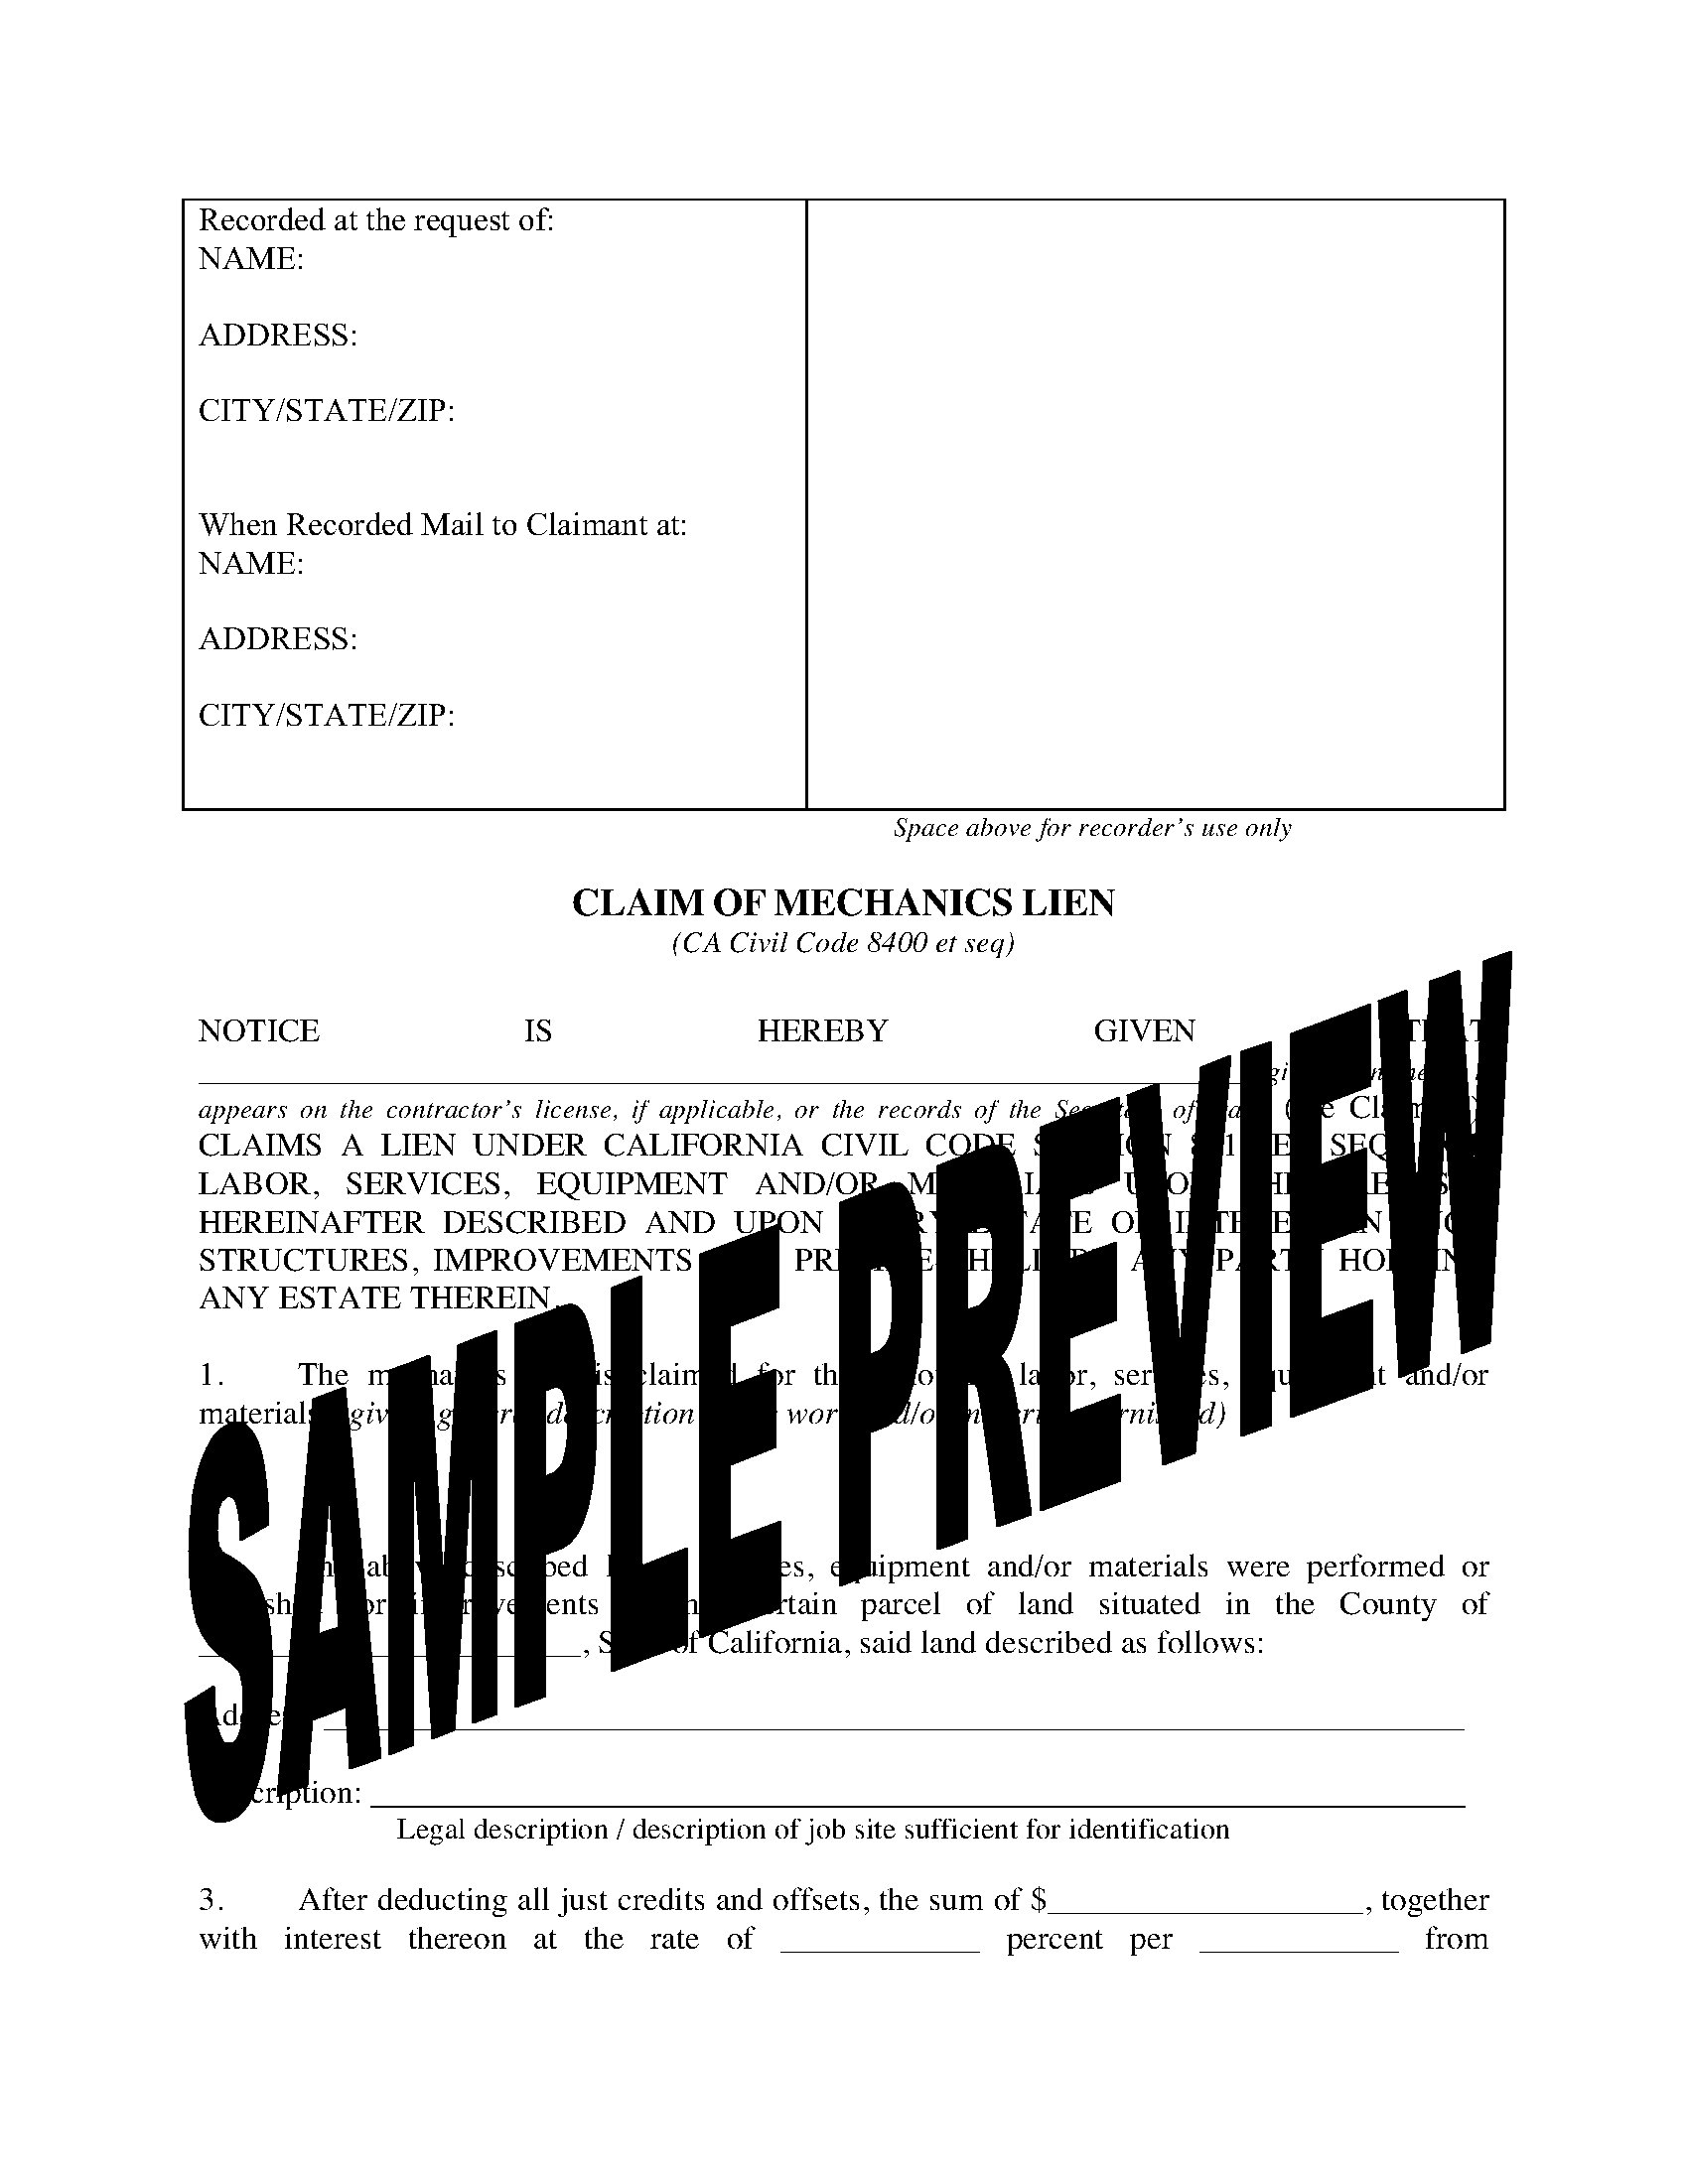 california-claim-of-mechanics-lien-form-legal-forms-and-business-templates-megadox